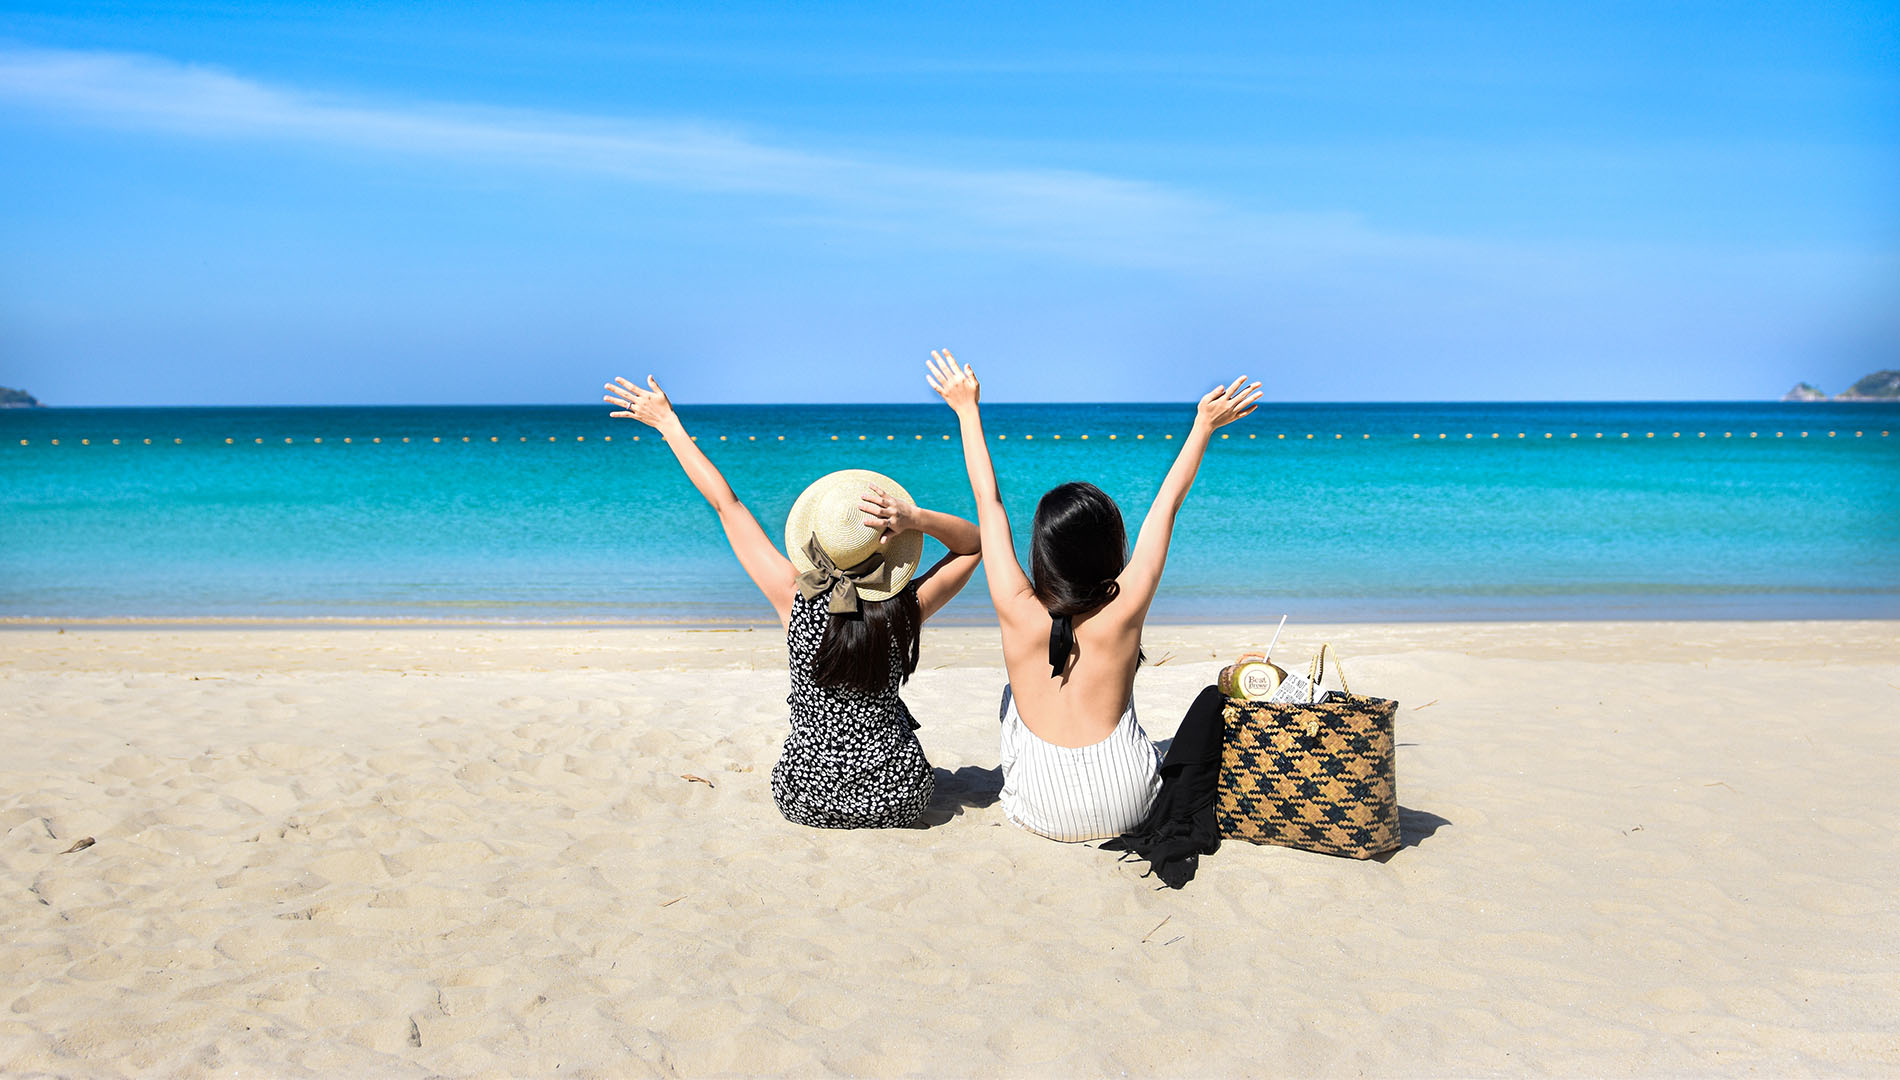 Two women sit on the beach with their arms raised